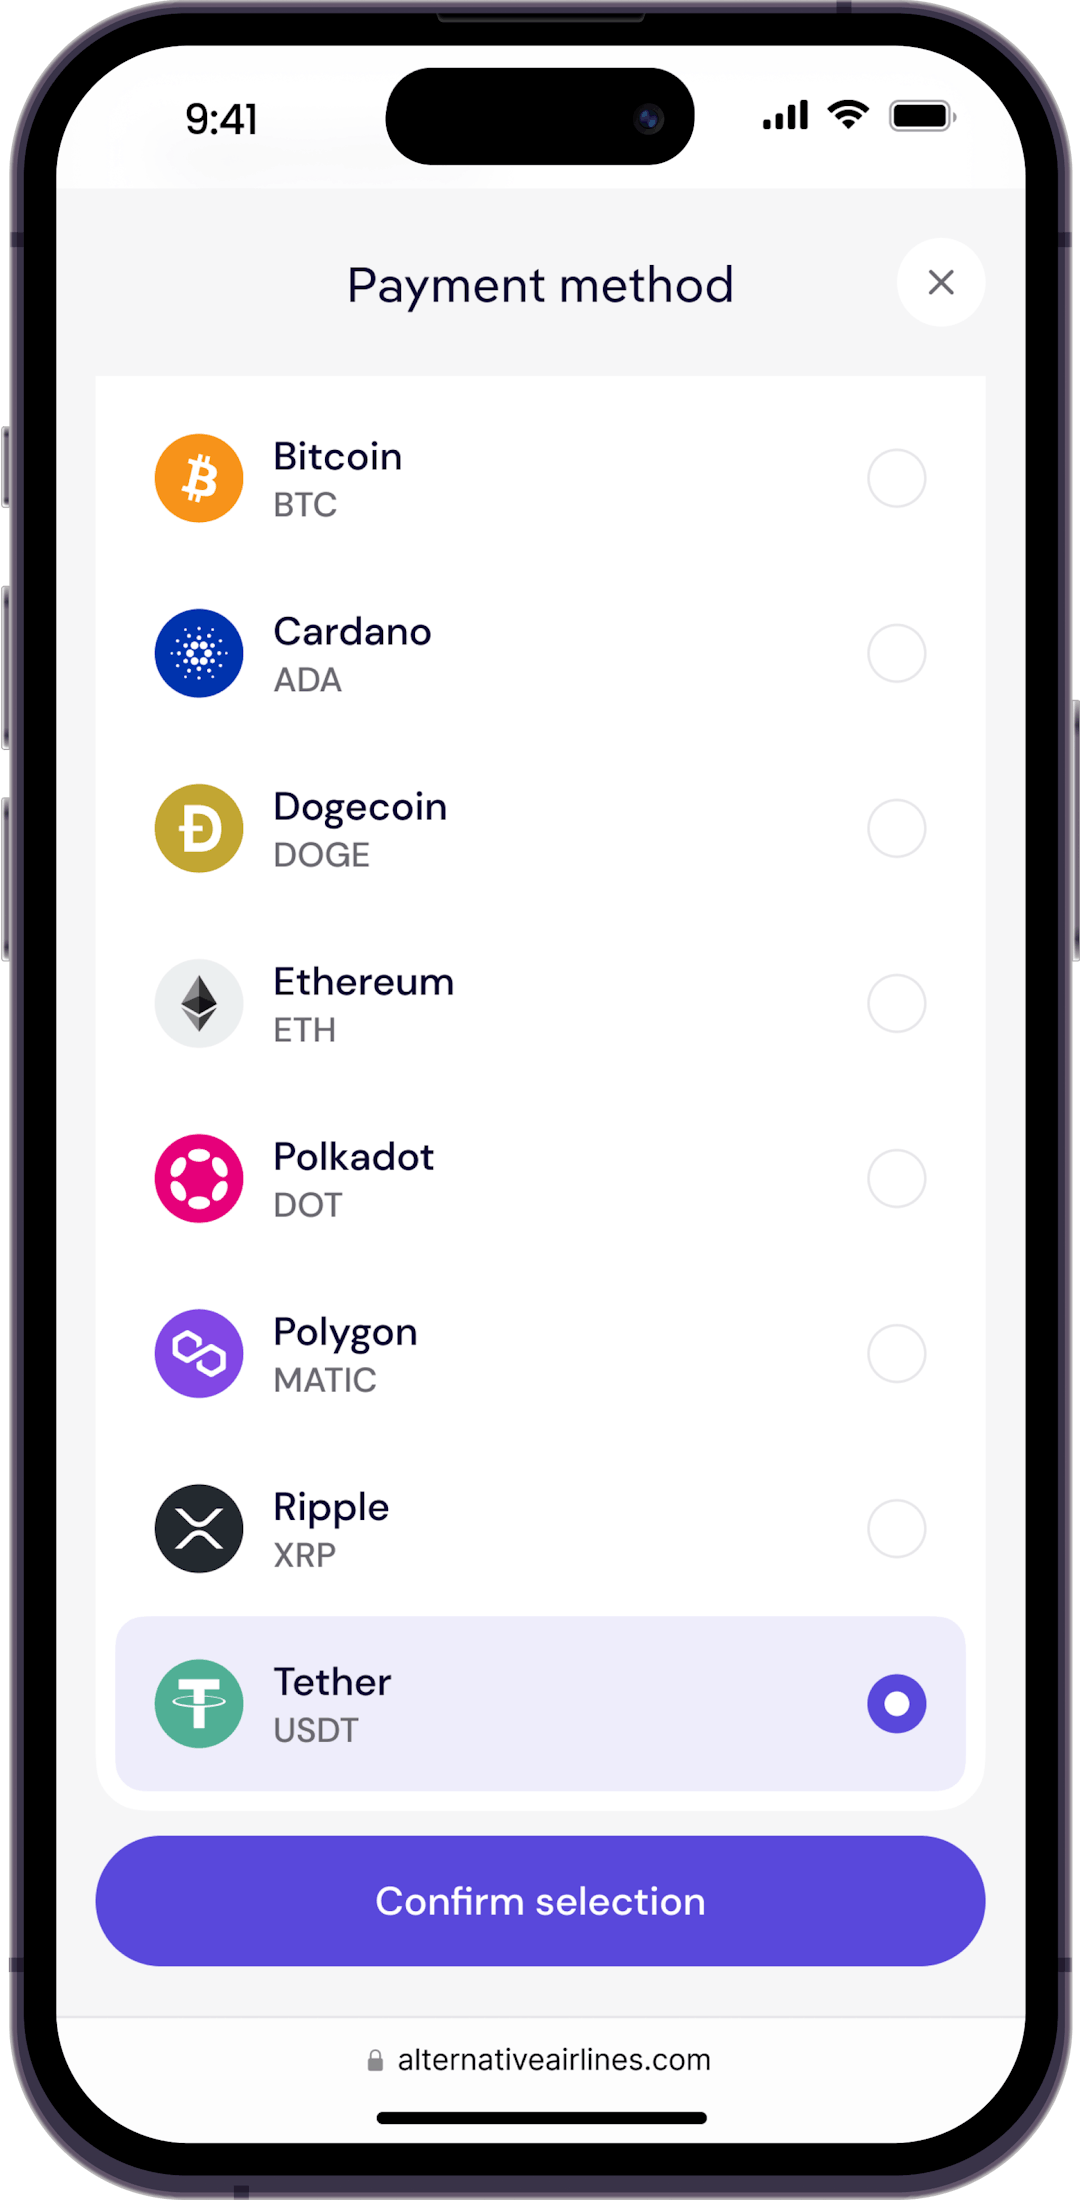 Search for and select cryptocurrency